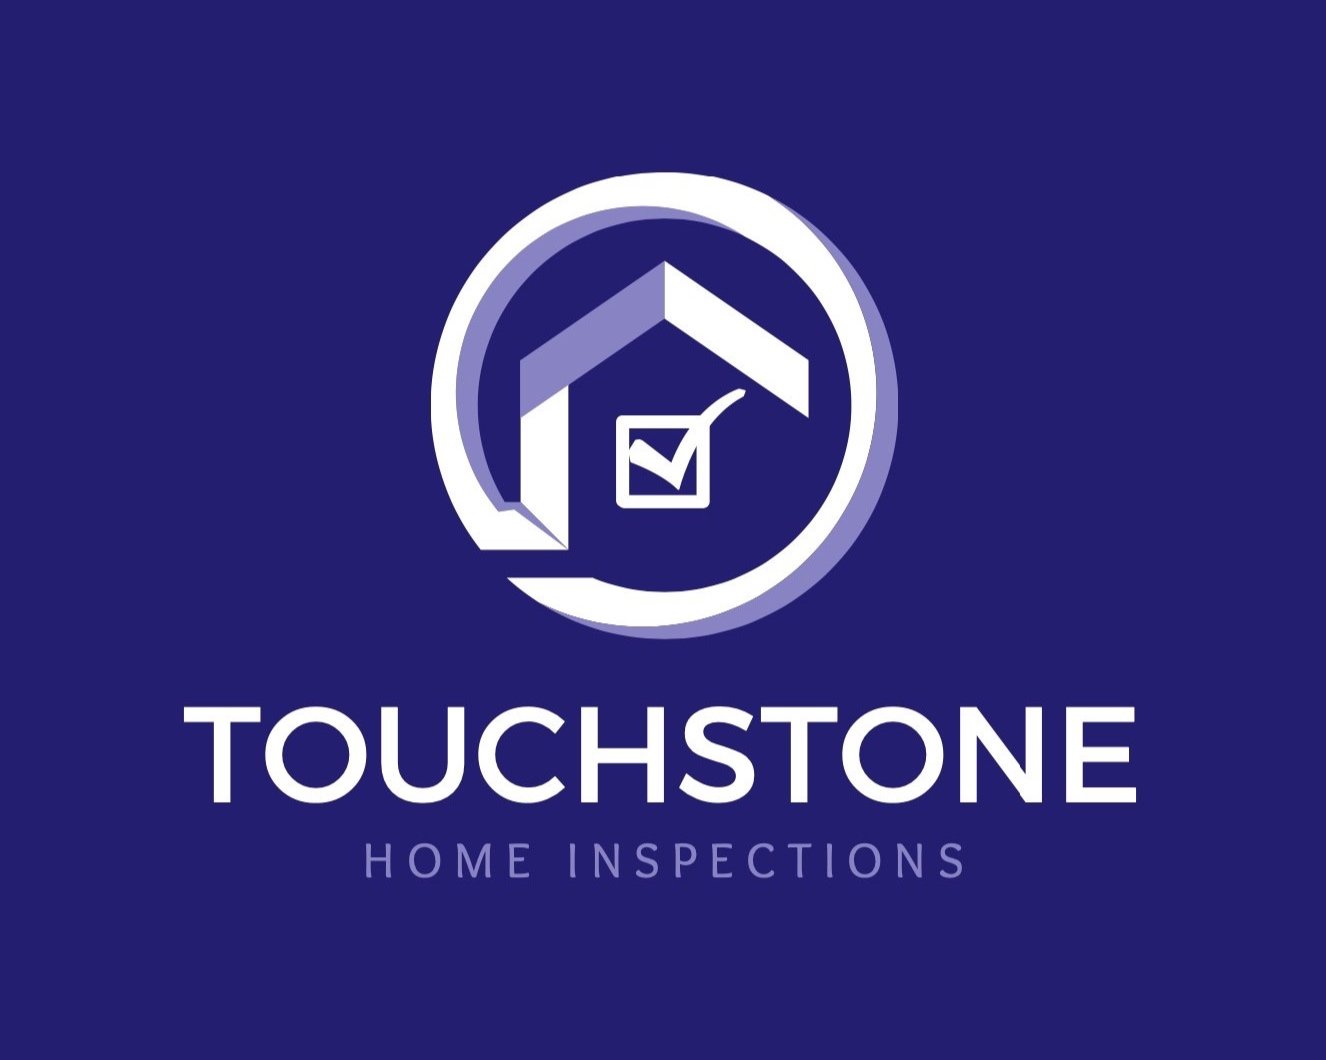 Touchstone Home Inspections